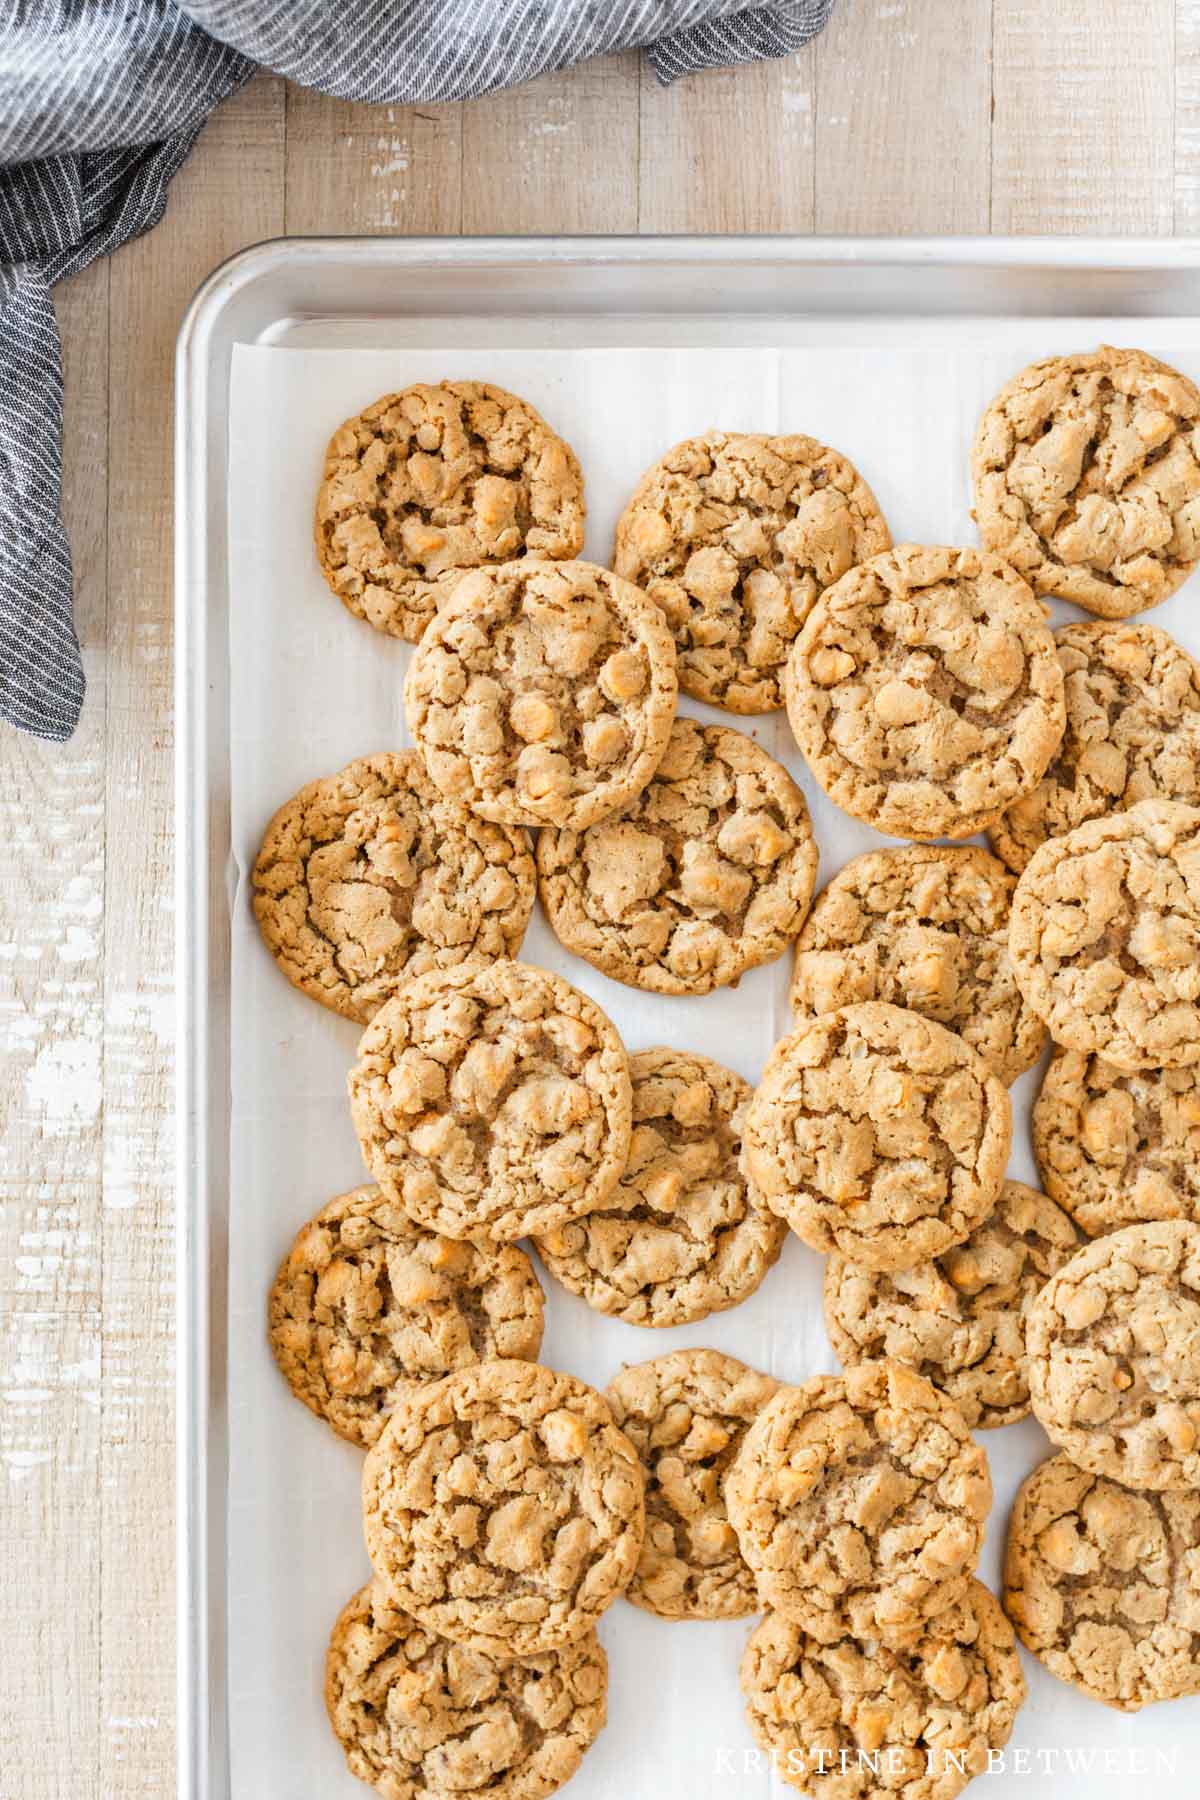 Peanut butter oatmeal butterscotch cookies piled up on a baking sheet with a blue striped napkin next to them.